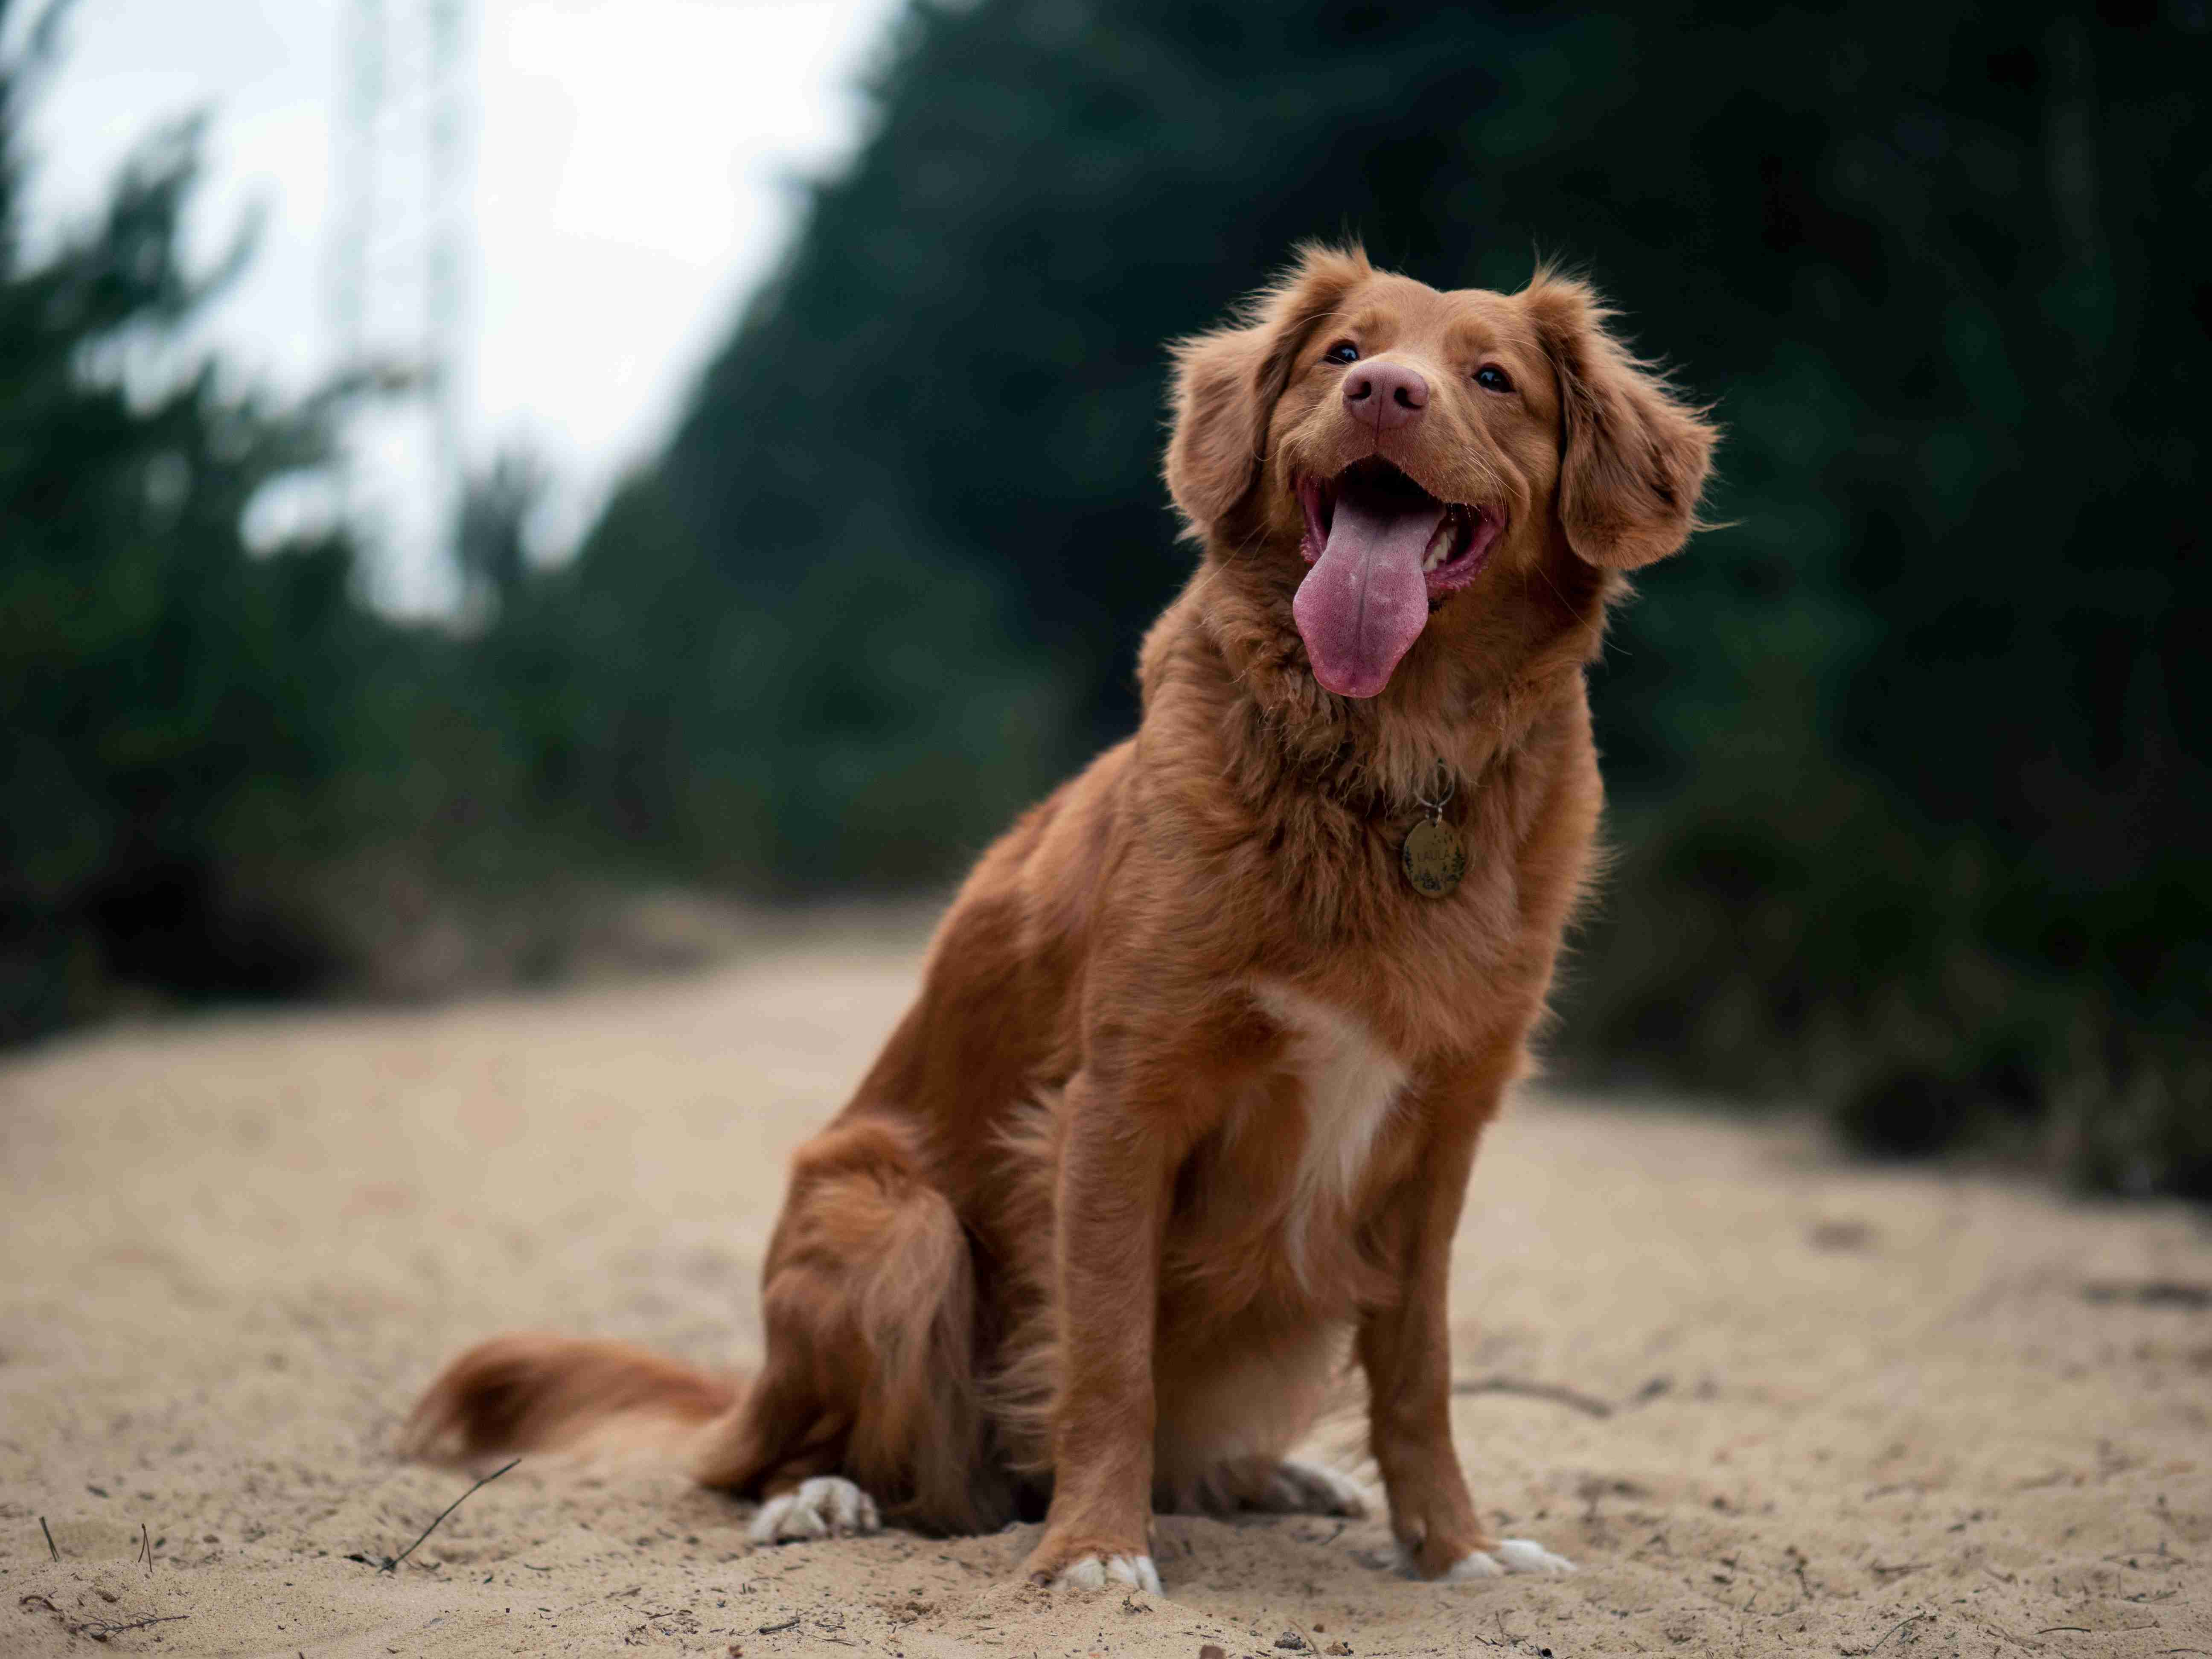 Are there any specific dietary restrictions or considerations for Golden Retrievers with certain health conditions?